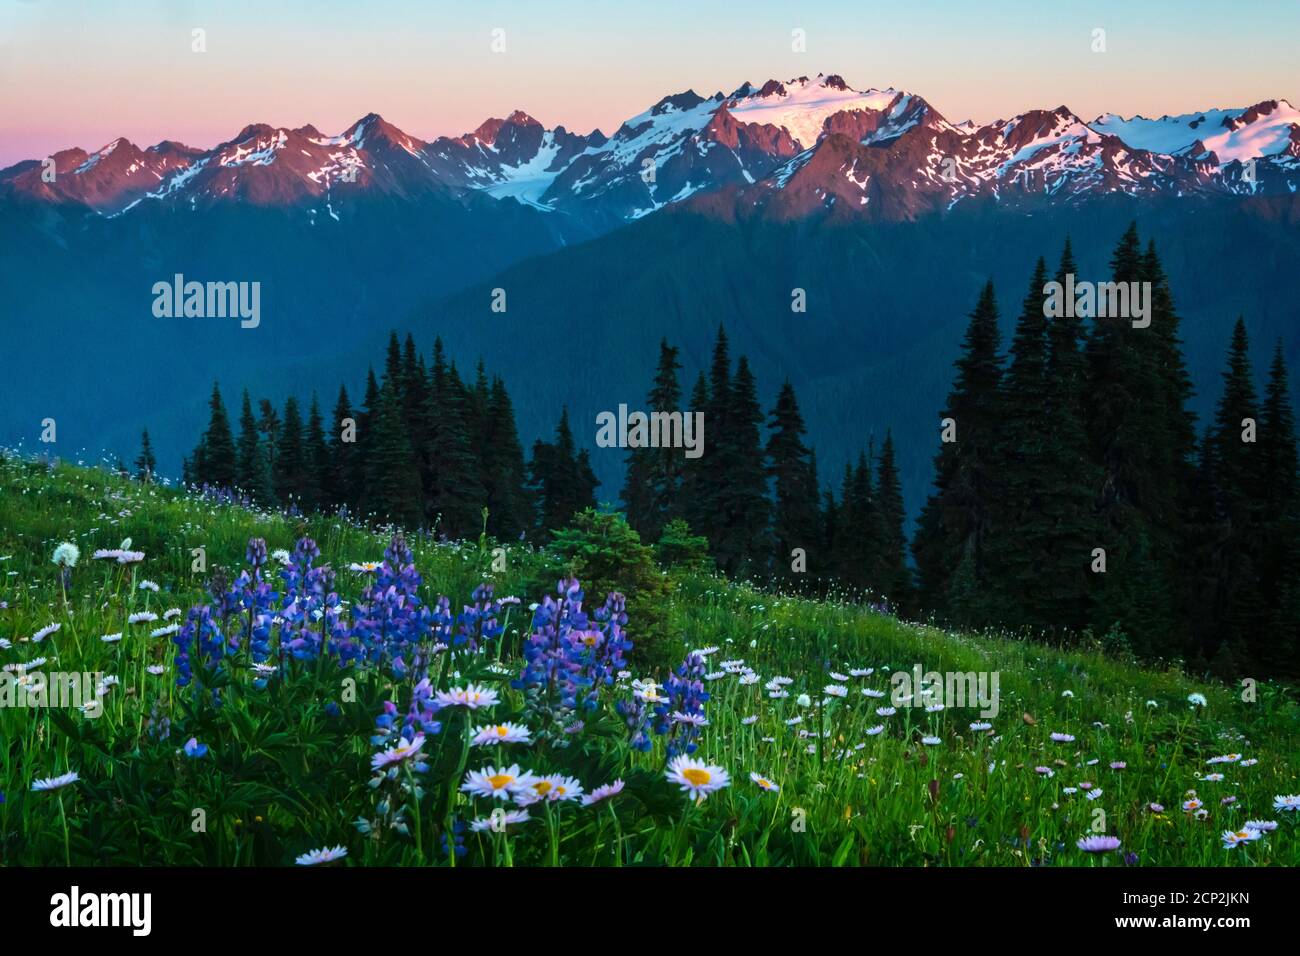 Mount Olympus above lupine and aster flowers on High Divide, Olympic National Park, Washington, USA. Stock Photo